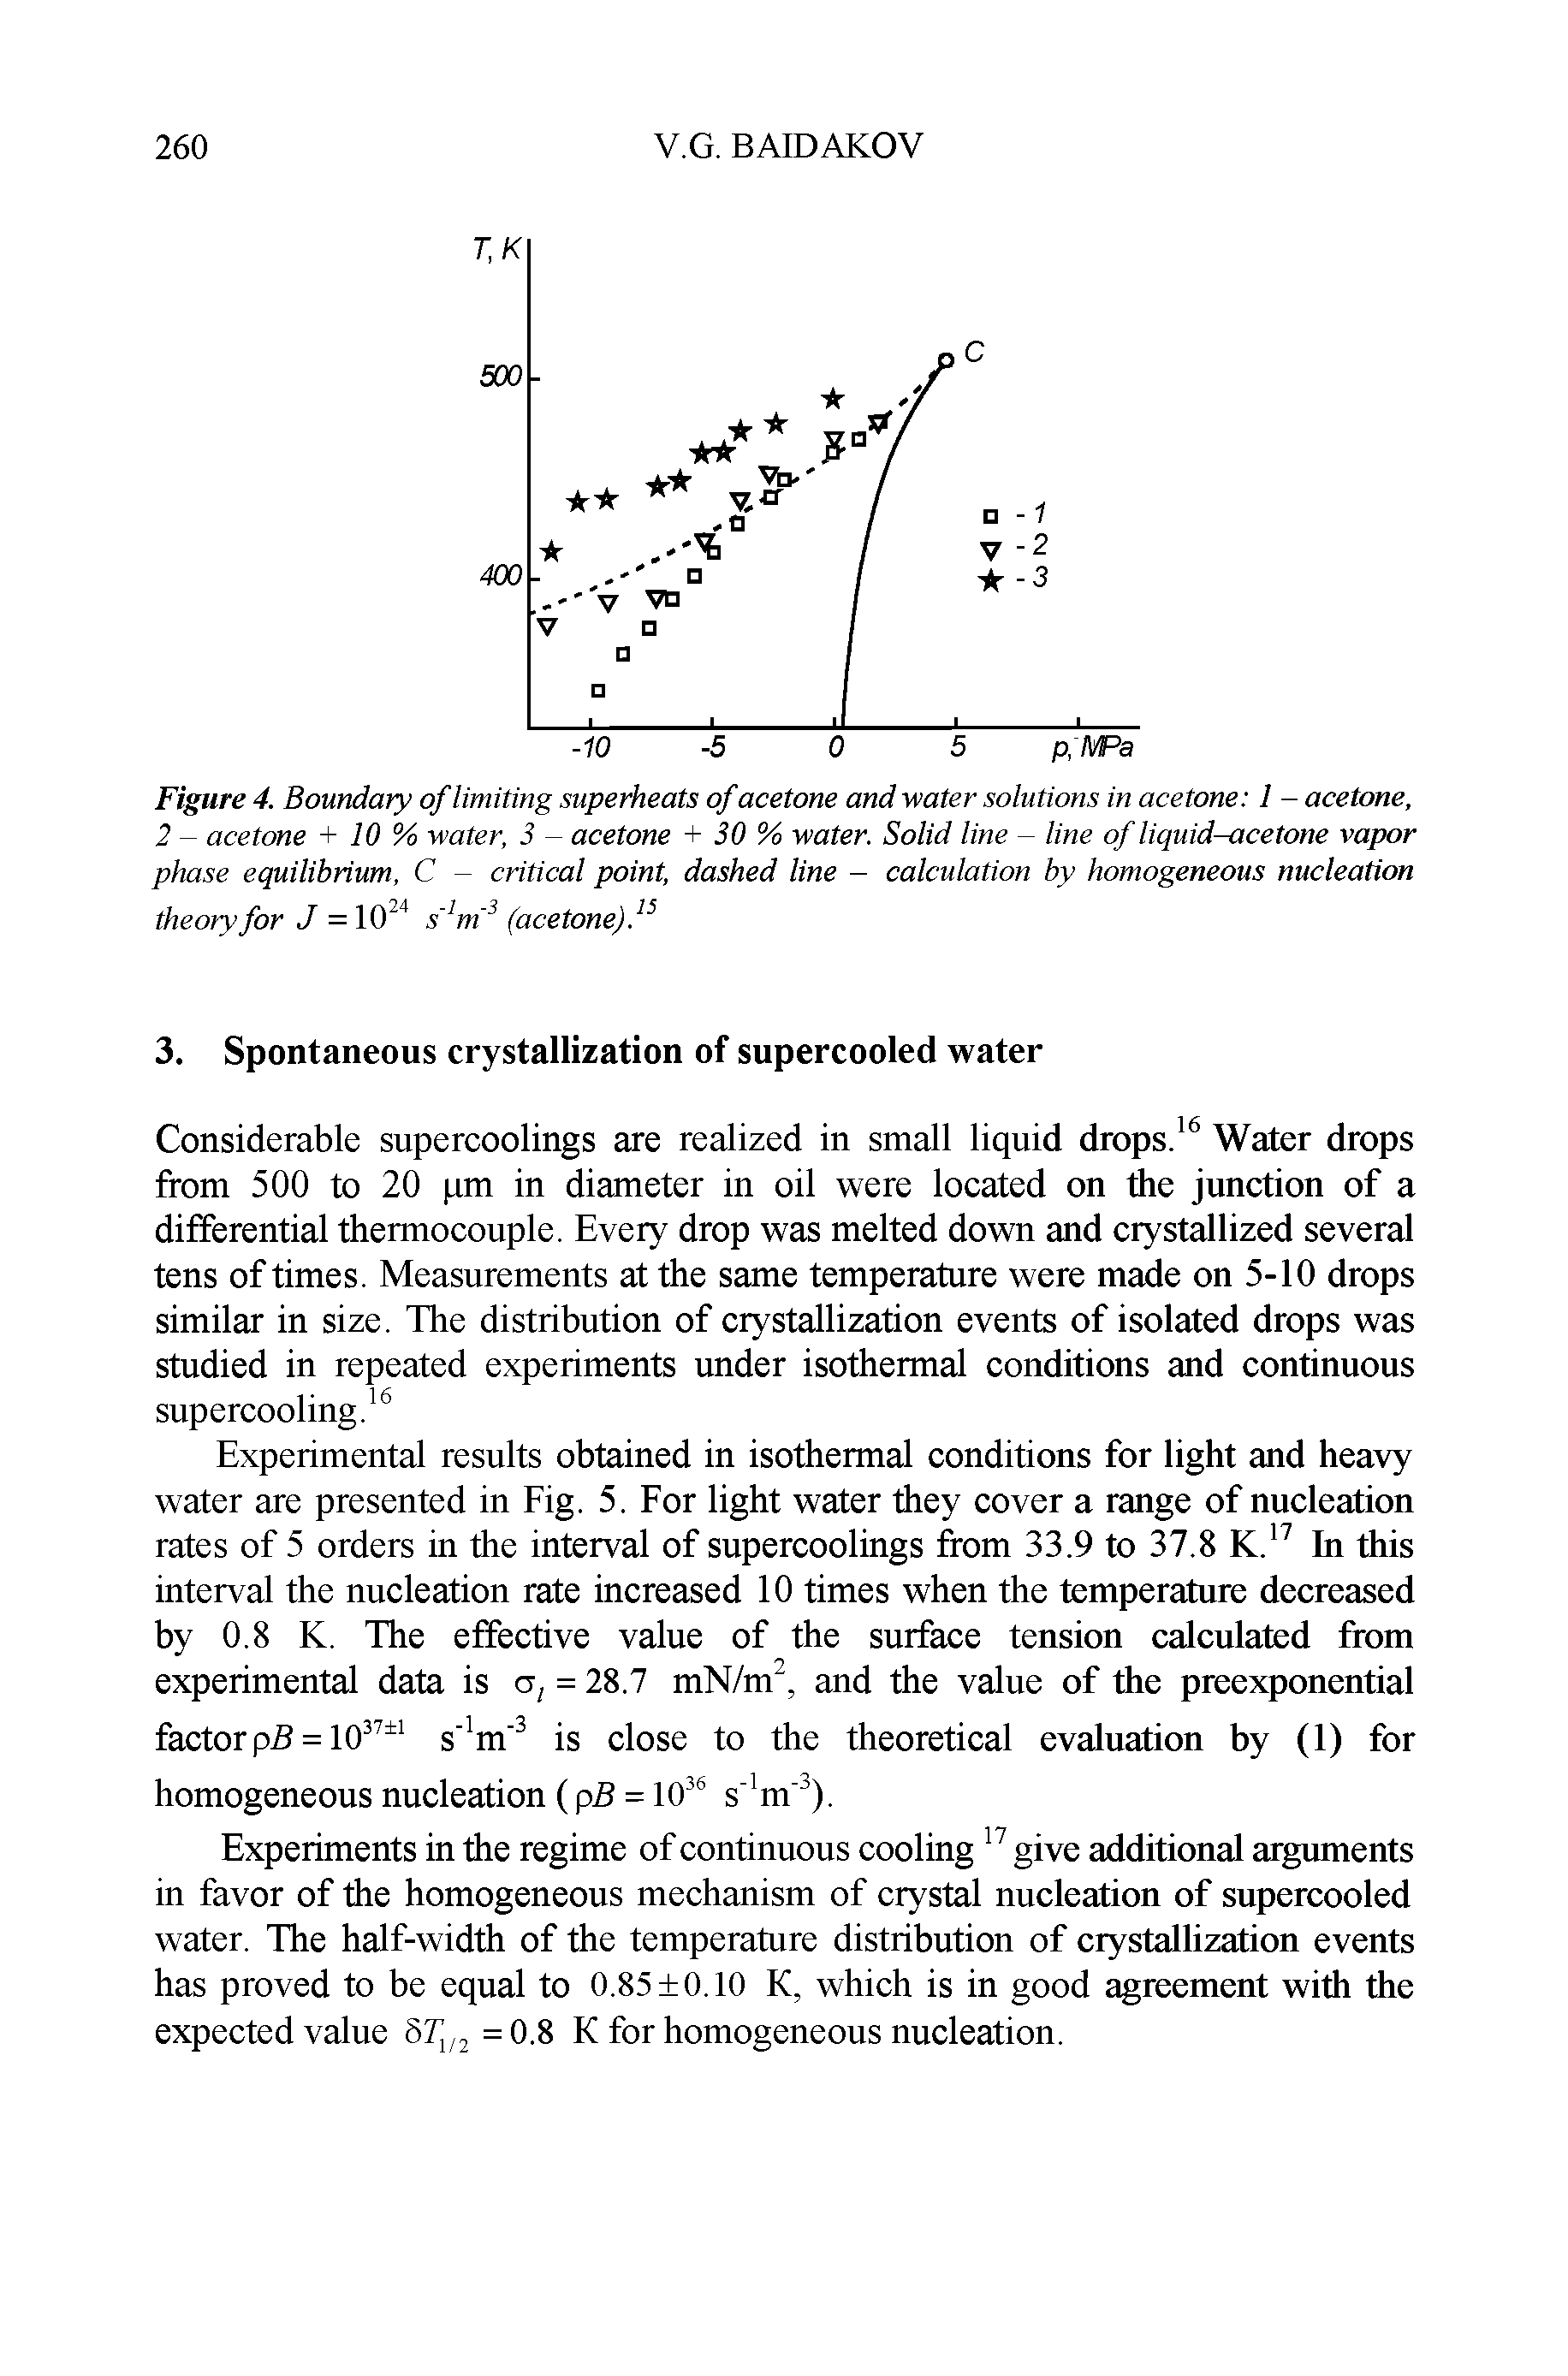 Figure 4. Boundary of limiting superheats of acetone and water solutions in acetone 1 - acetone, 2 - acetone + 10 % water, 3 - acetone + 30 % water. Solid line - line of liquid-acetone vapor phase equilibrium, C - critical point, dashed line - calculation by homogeneous nucleation theory for J = 10 s m (acetone). ...